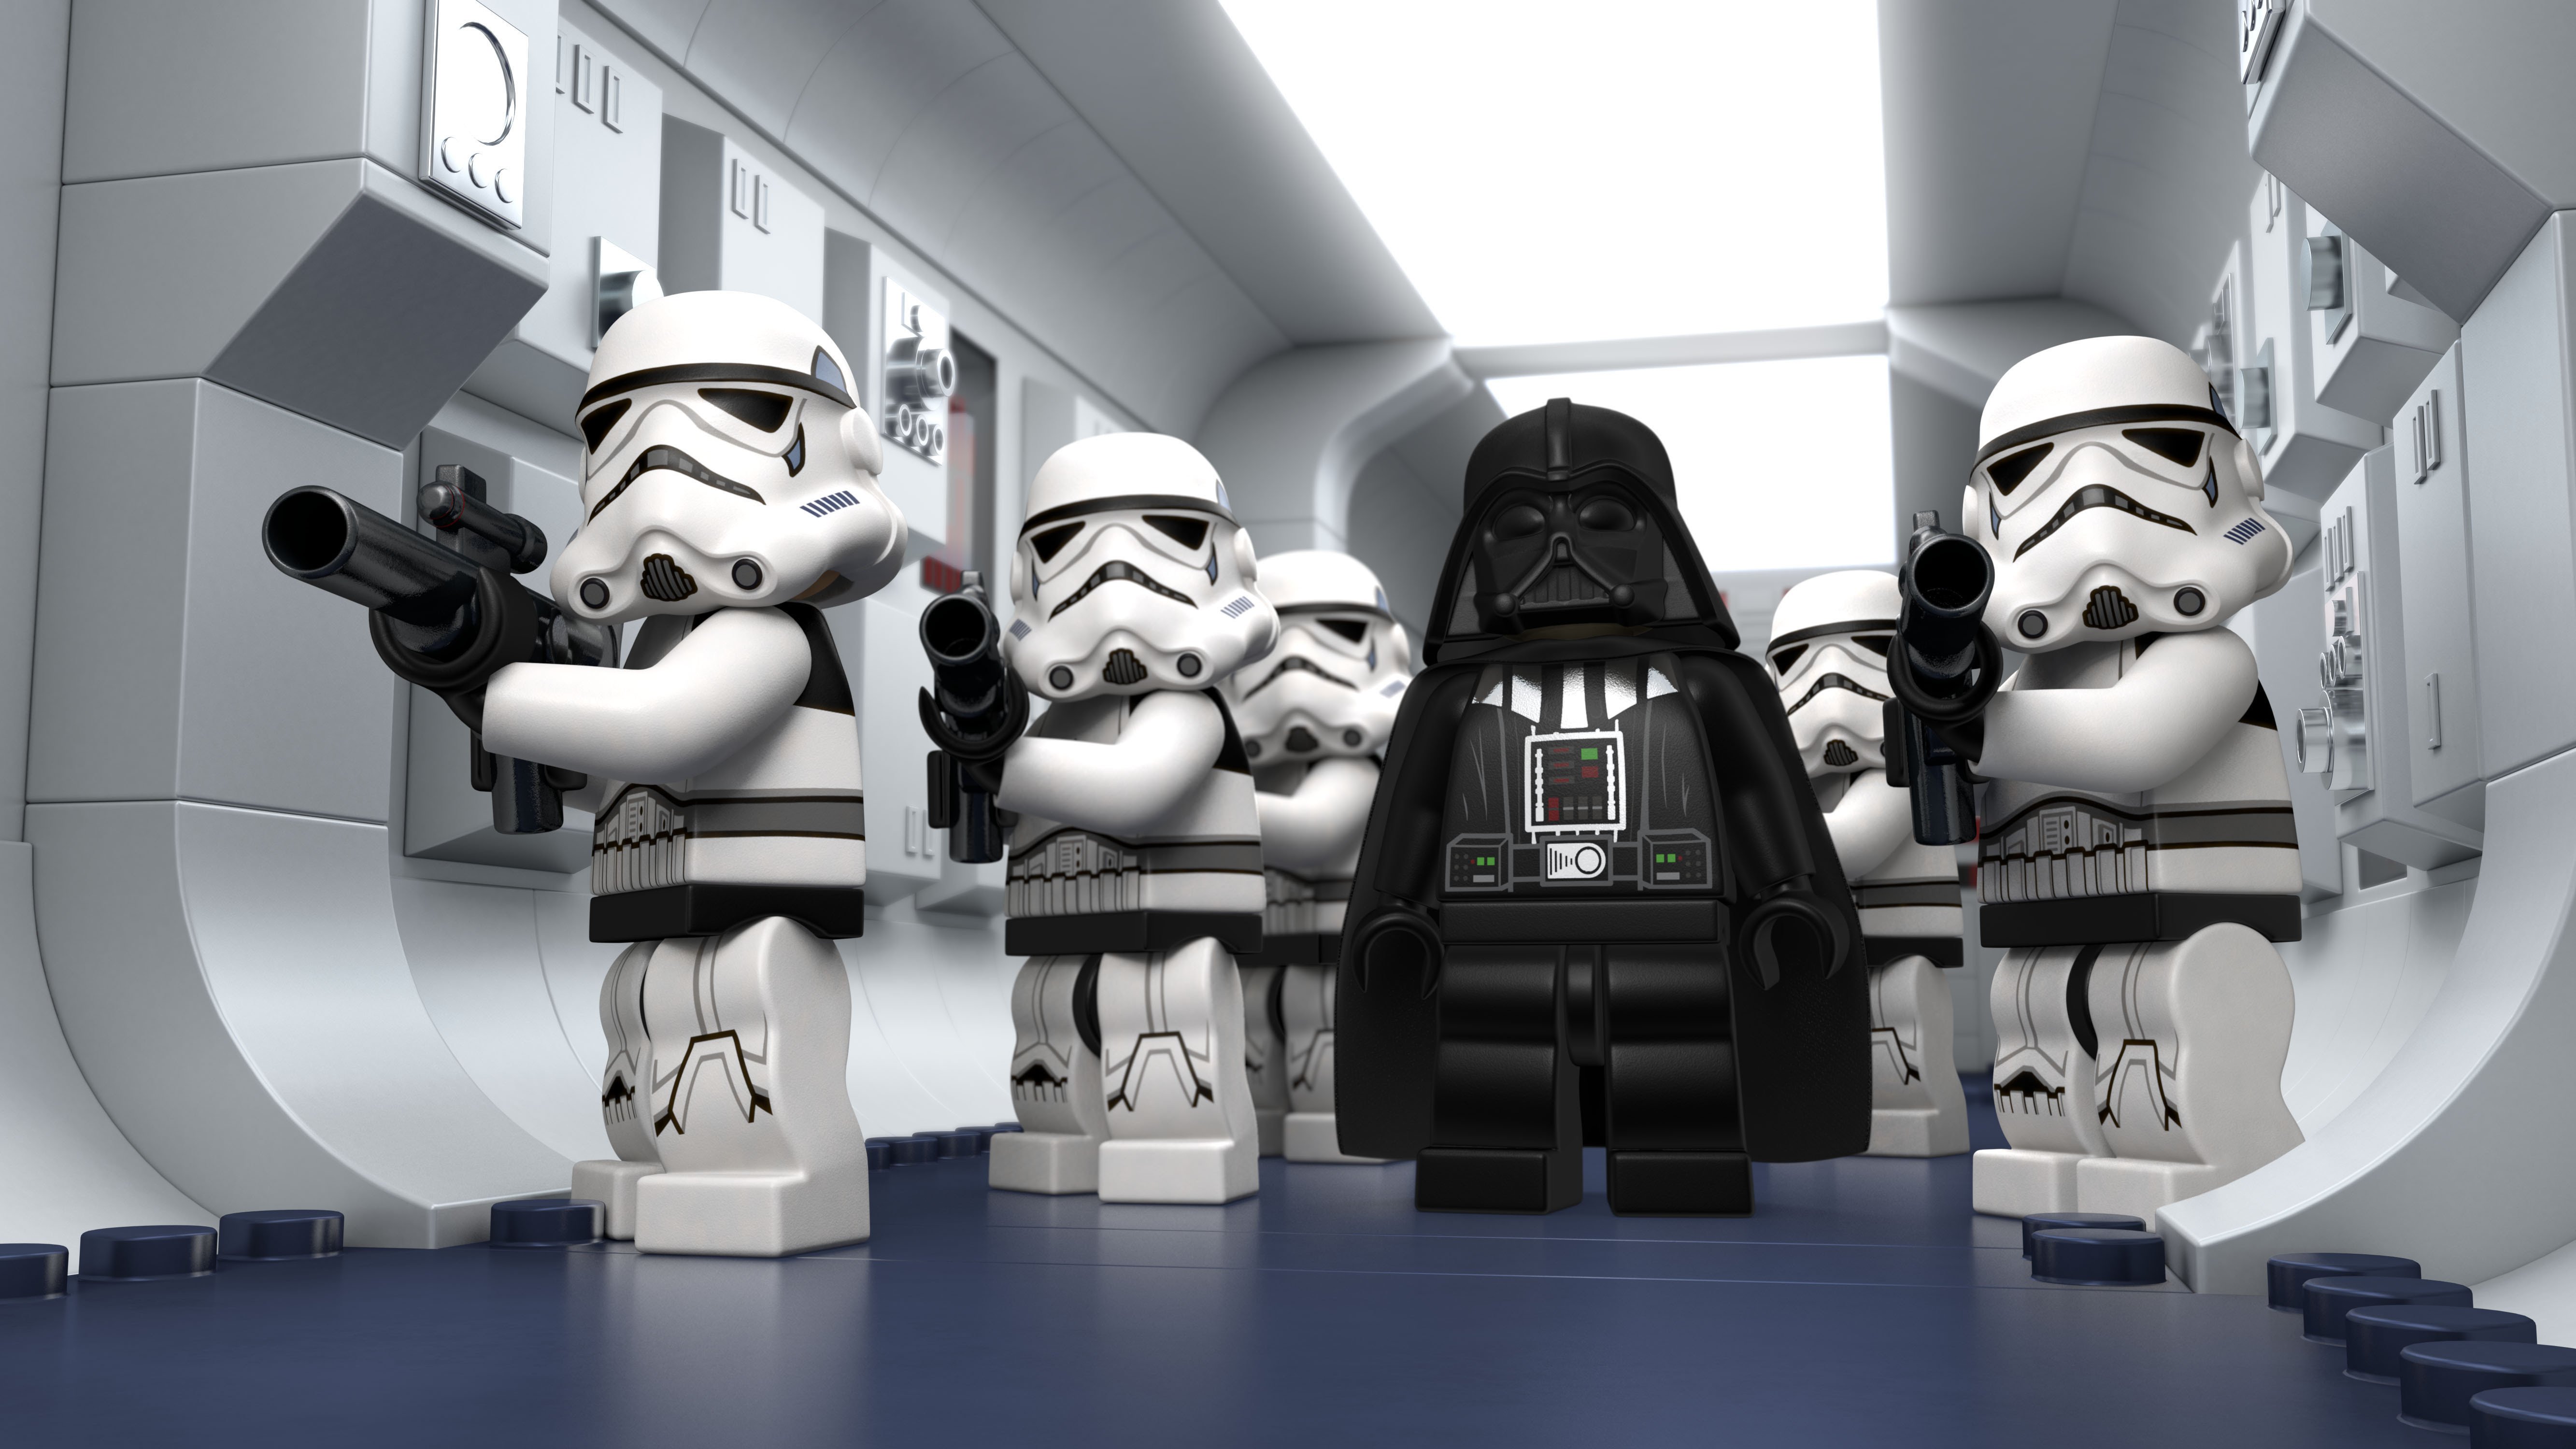 Lego Darth Vader And Stormtroopers - HD Wallpaper 